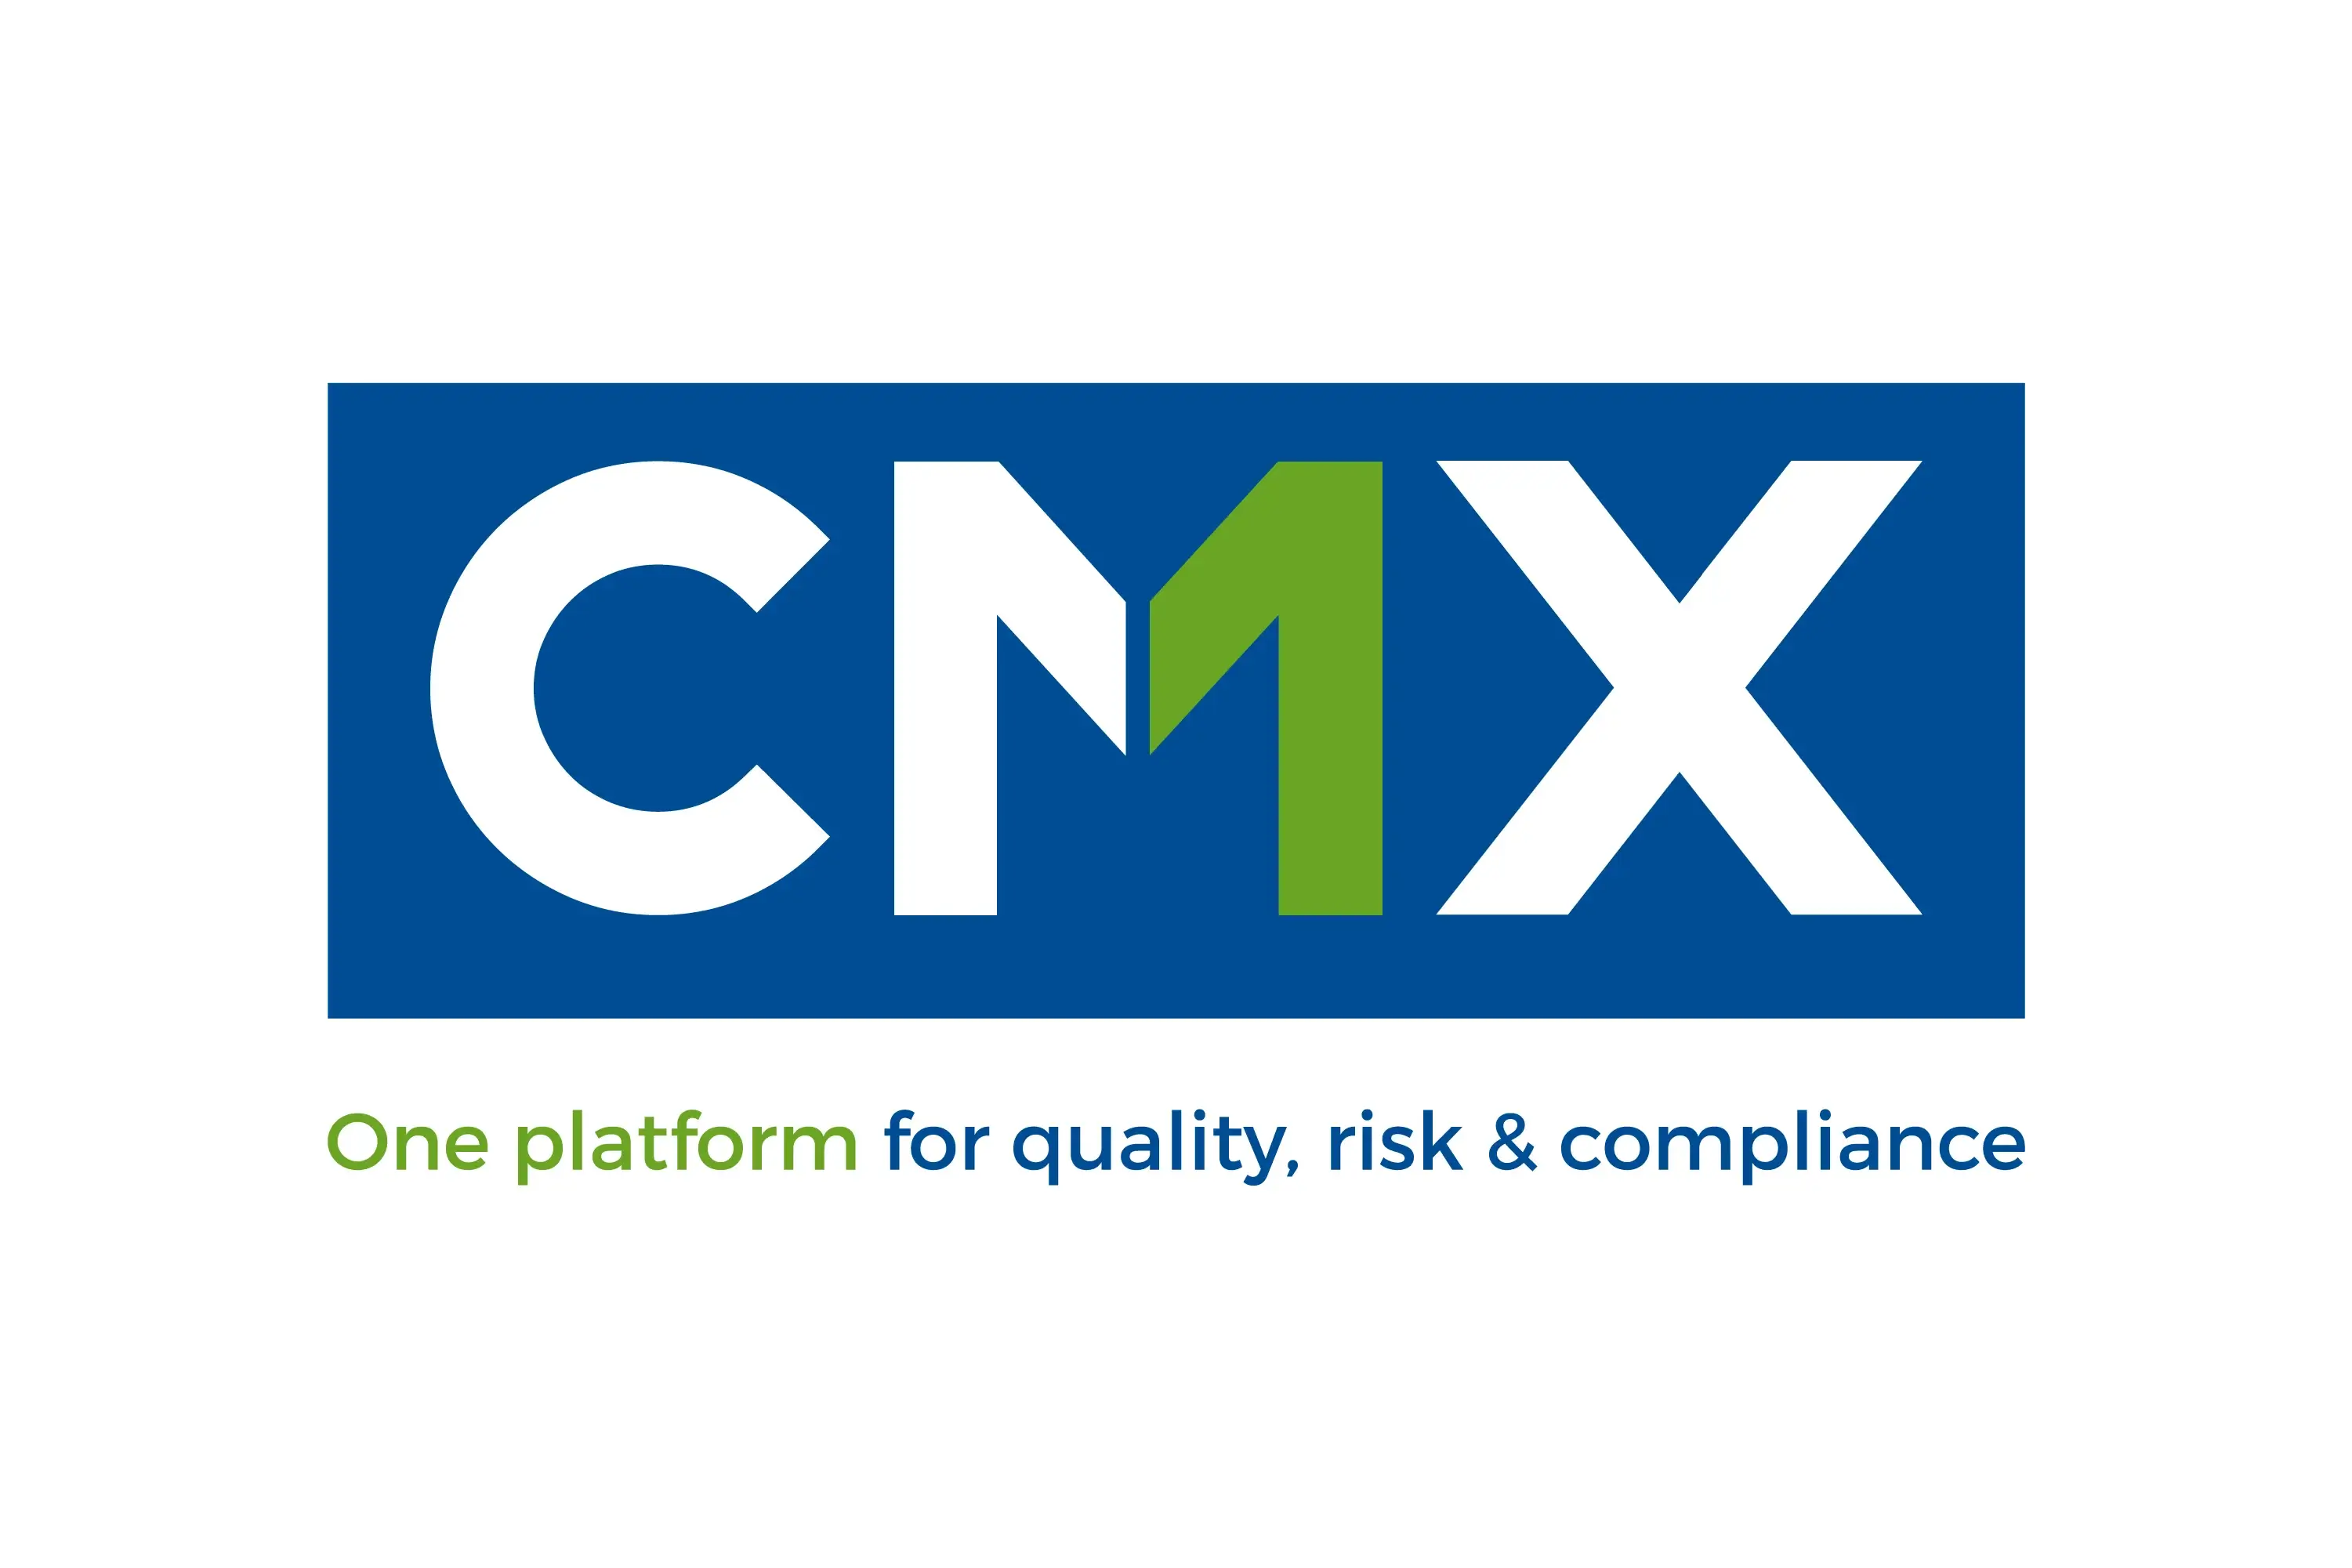 ComplianceMetrix Rebrands to Reflect Focus on Quality and Operational Excellence